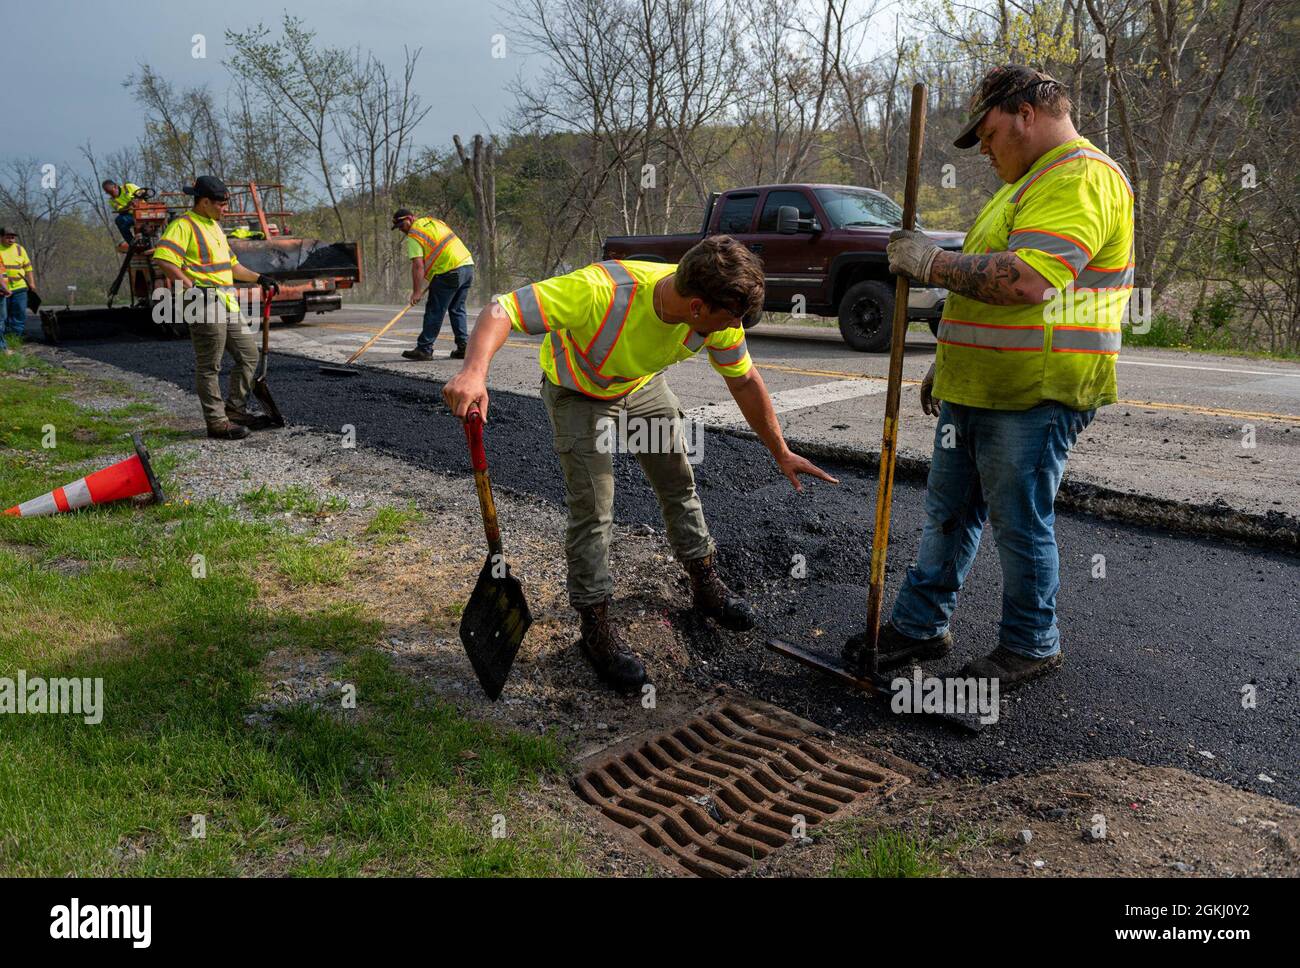 A construction crew repaves a road to cover newly completed sewer lines for a water infrastructure project partially funded under the Water Resource Development Act of 1936, in Amsterdam, Ohio, April 28, 2021. The U.S. Army Corps of Engineers Pittsburgh District oversees projects like this one, which helps distressed communities receive federal assistance under WRDA. The district has seen a growth in water and sewage infrastructure demand and approved nine new water projects in Allegheny County and Northern West Virginia in the last three years under Section 219. Eastern Ohio is covered by Sec Stock Photo